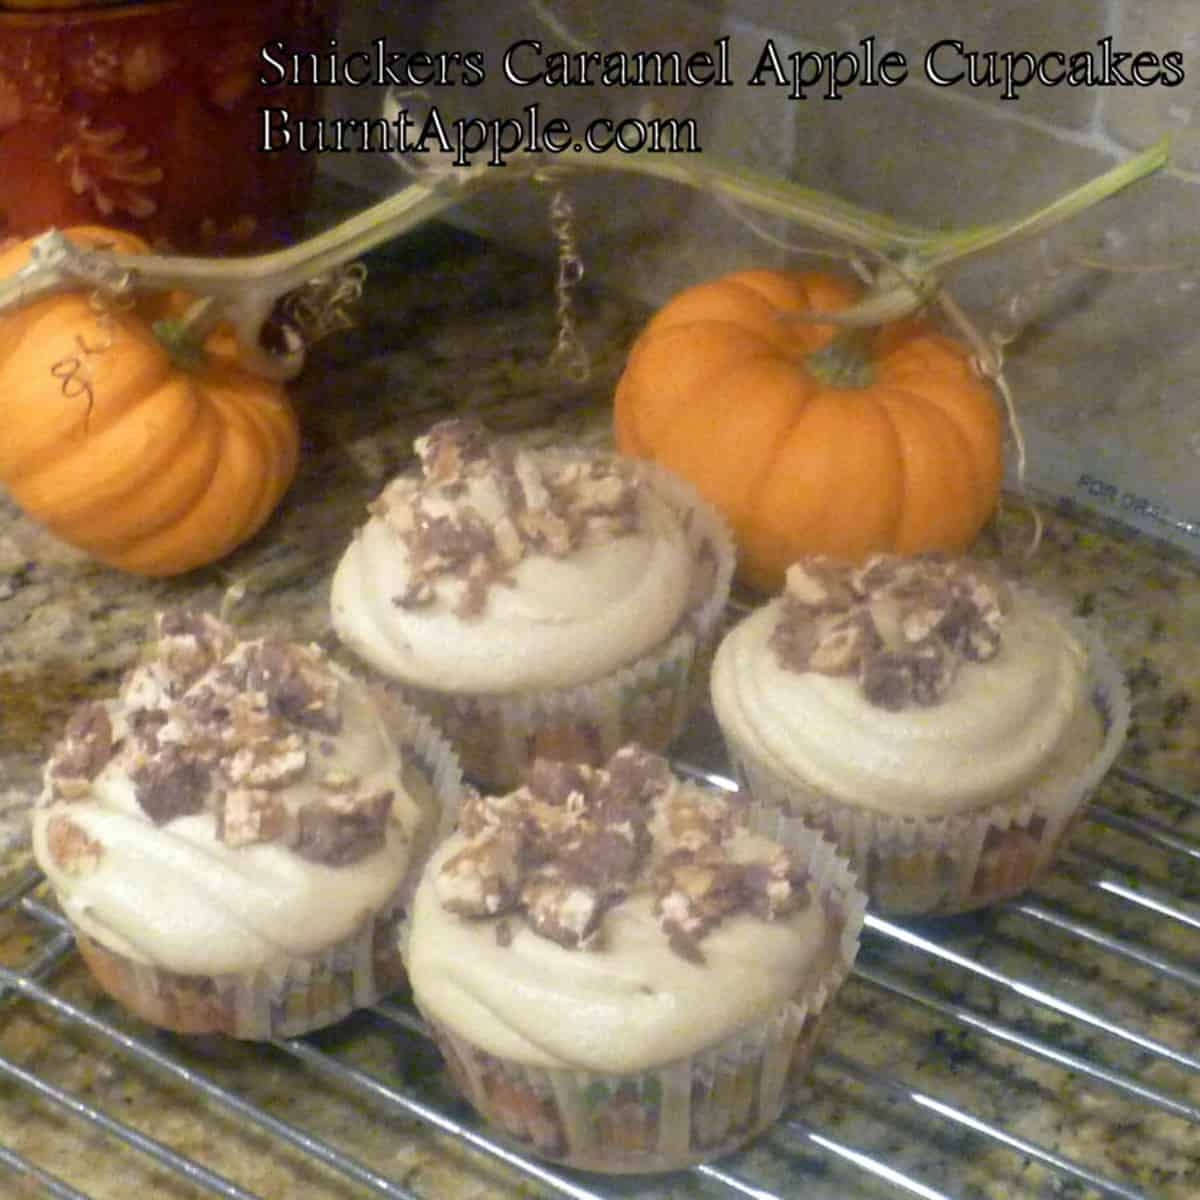 A round cupcake with a brown caramel frosting and topped with a Snickers bar and a caramel candy apple. The cupcake is decorated with crushed Snickers bar pieces and caramel sauce drizzle.